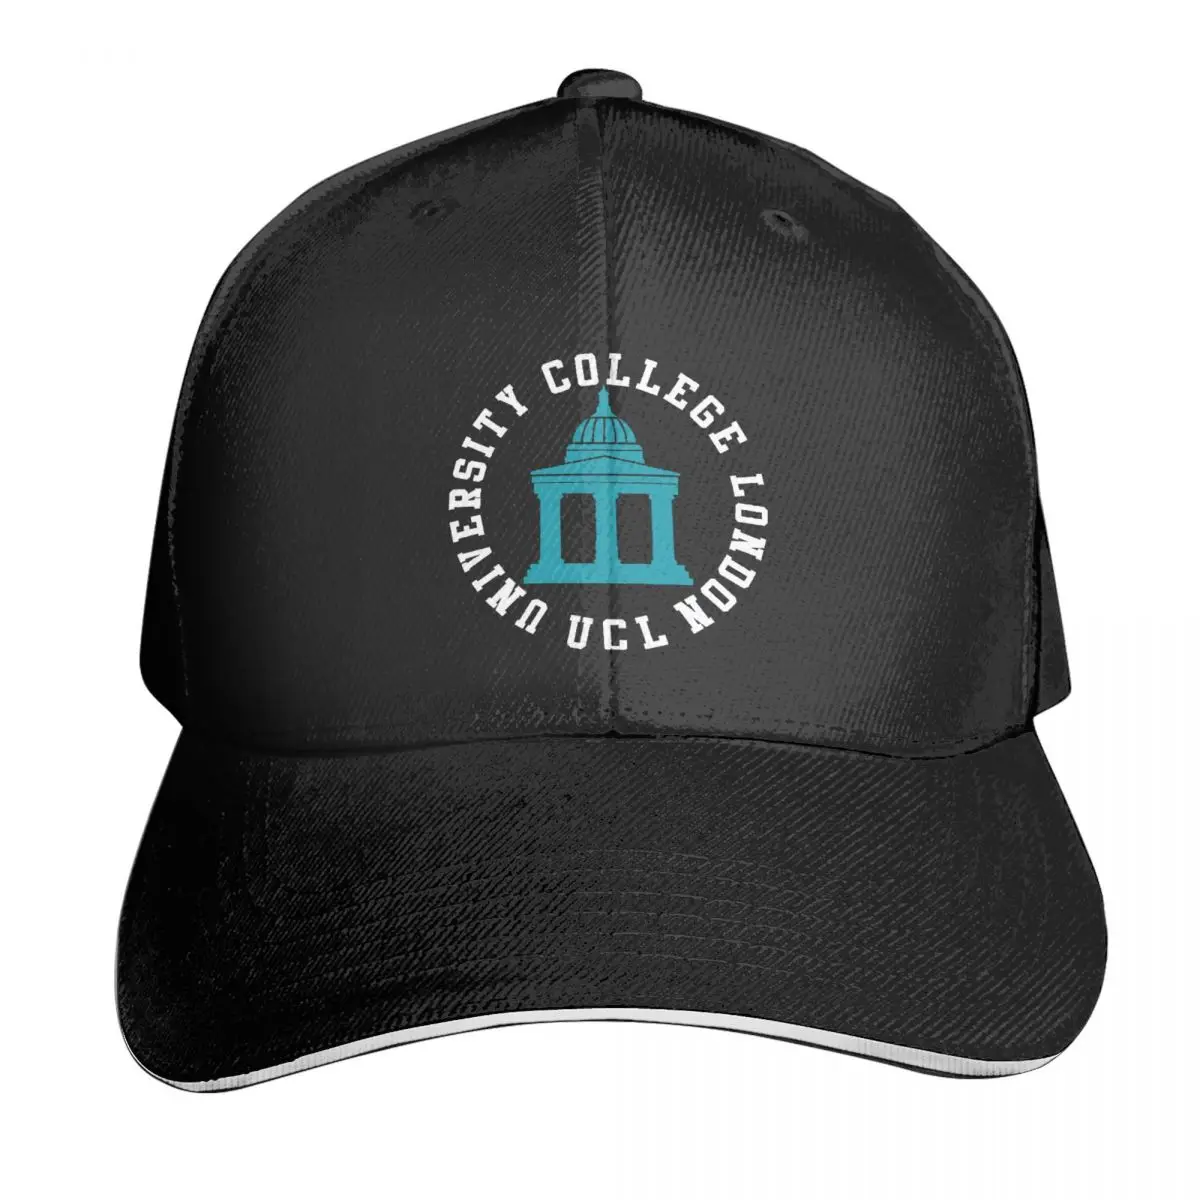 

UCL University College London Casquette, Polyester Cap Retro Wicking Nice Gift